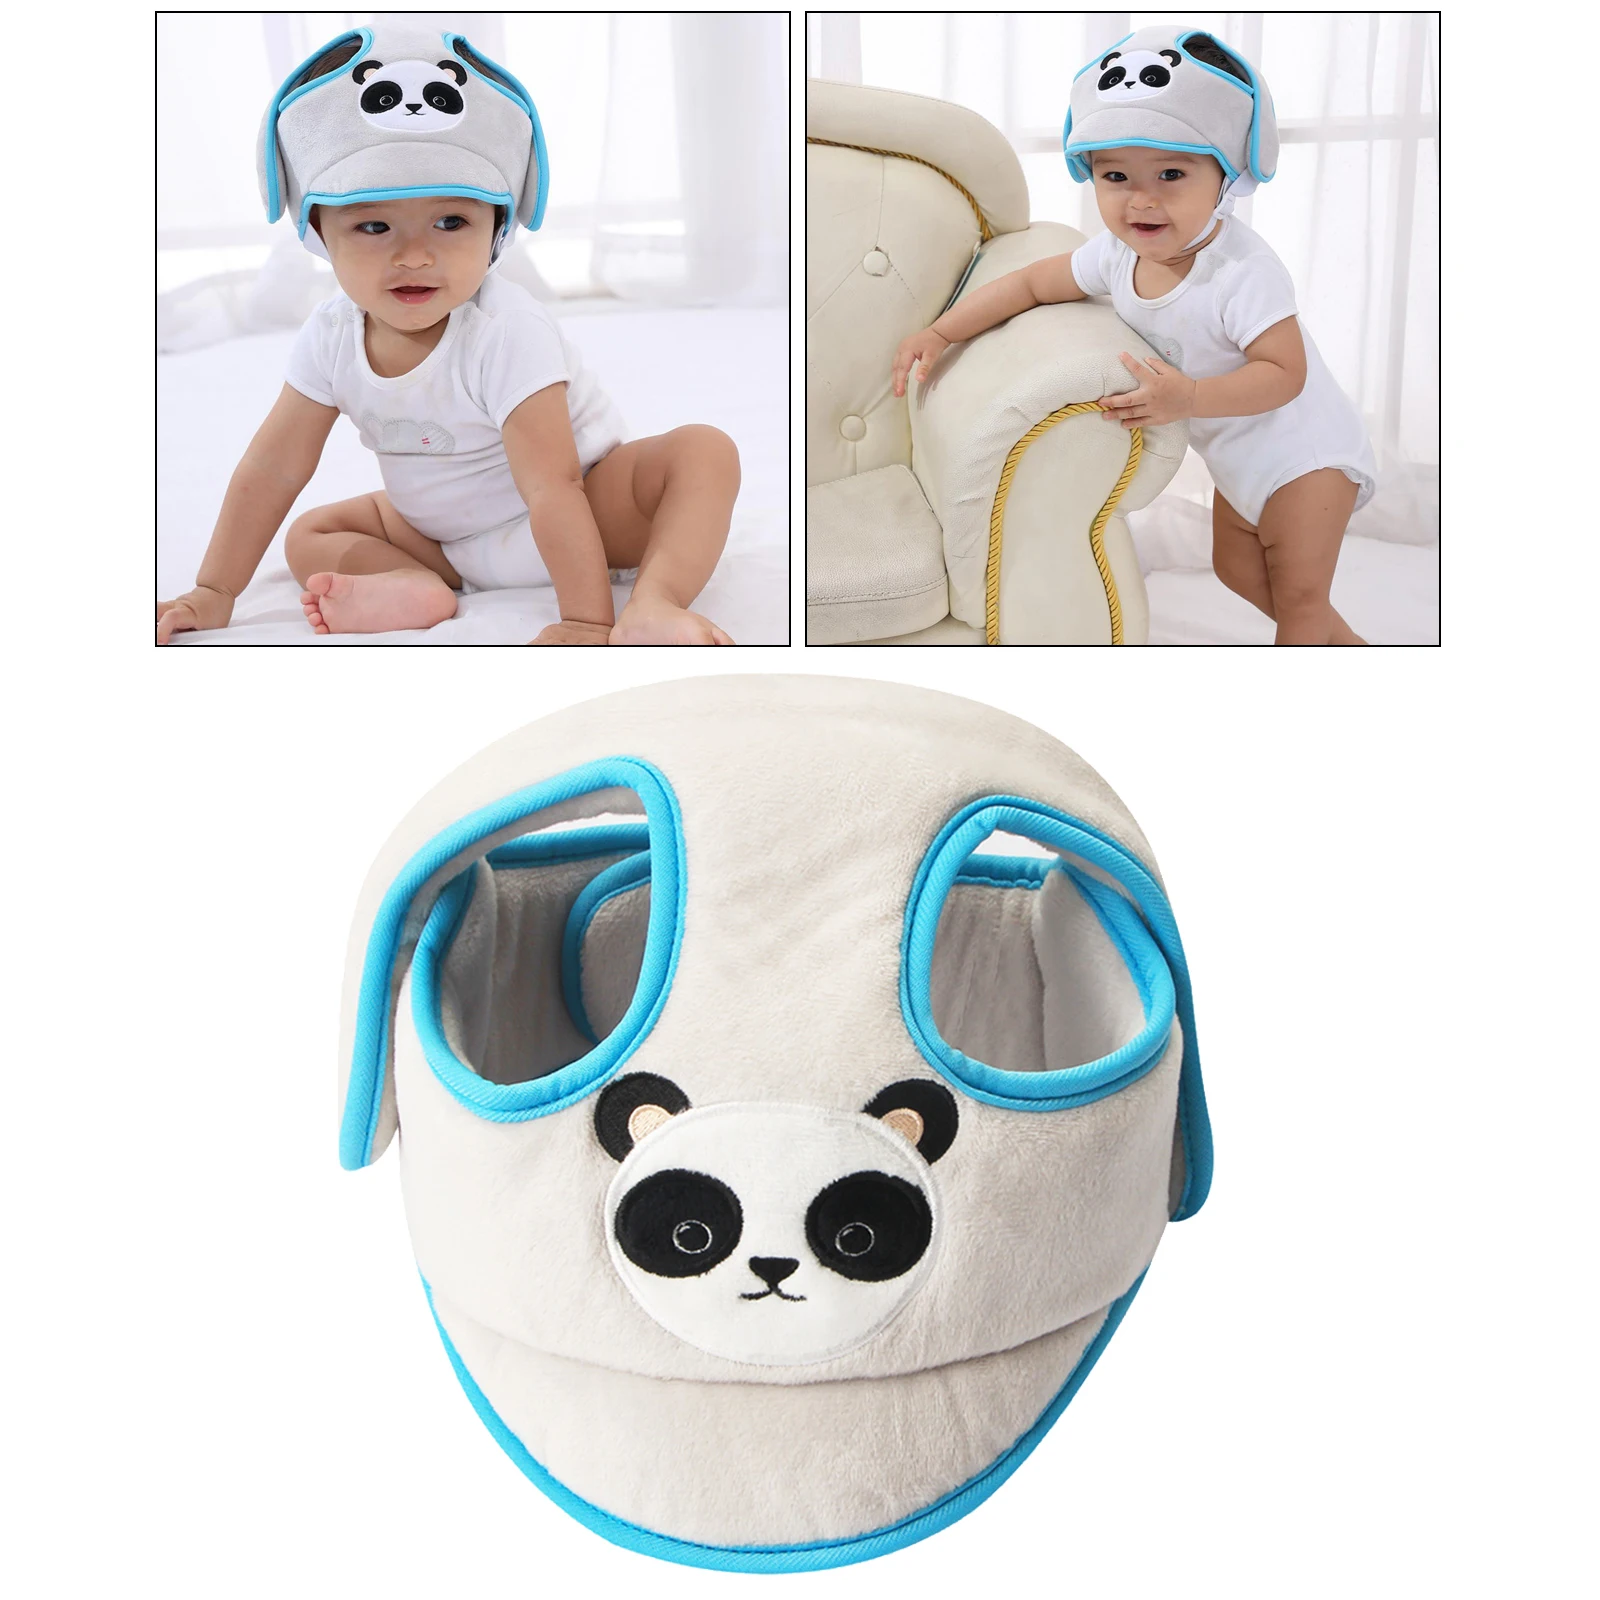 Adjustable Infant Toddler Kids Baby Head Guard  Safety Head Guard Cap